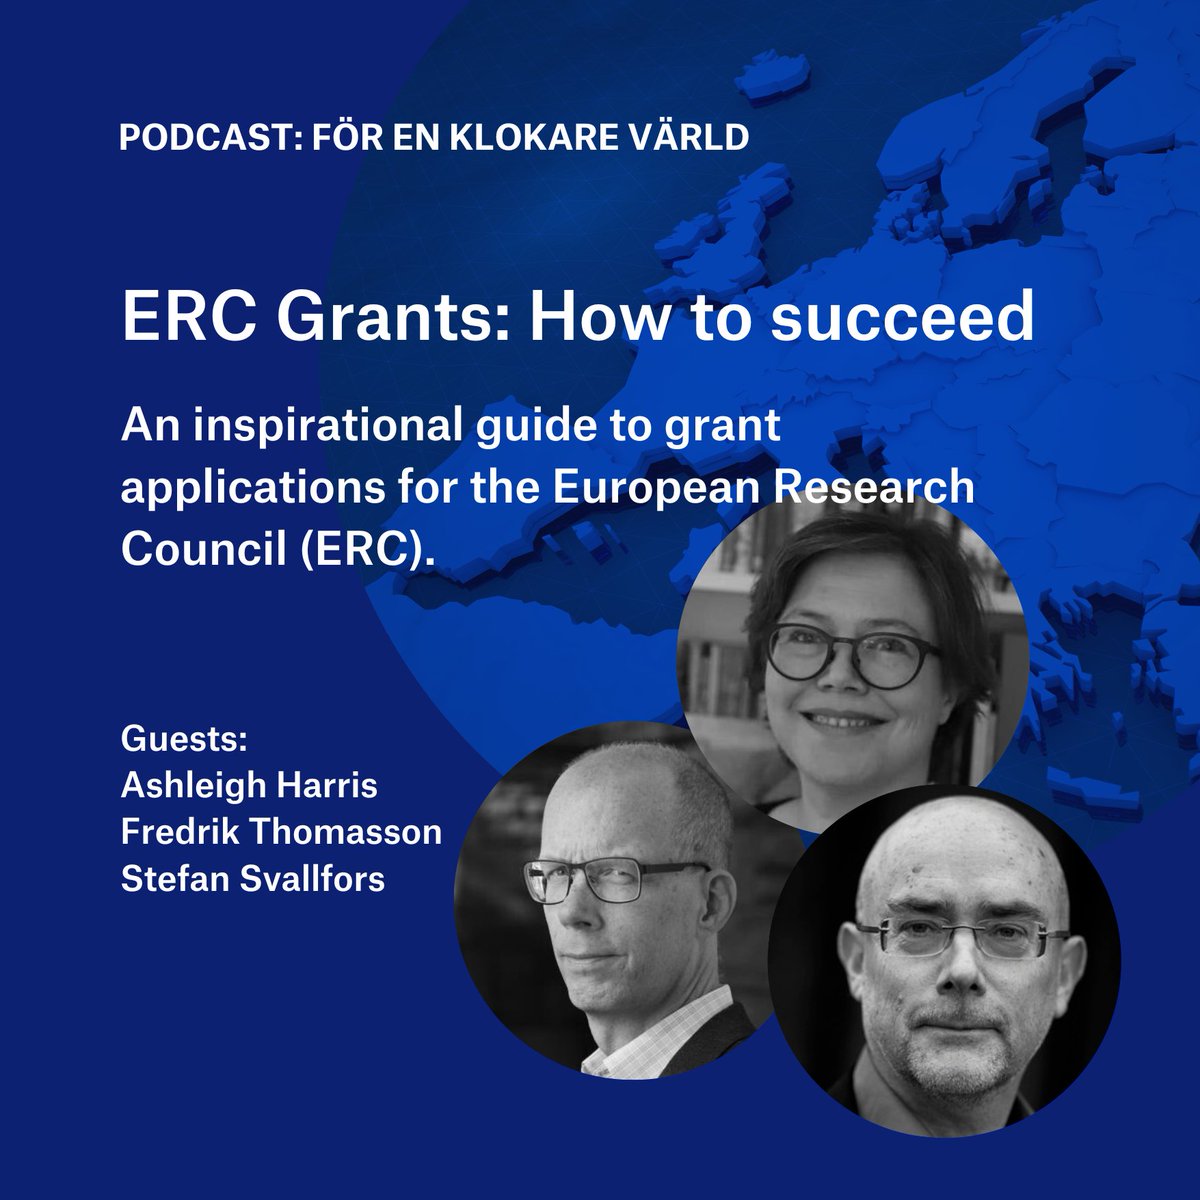 New podcast! ERC Grants: How to succeed Listen to the ERC grant recipients Ashleigh Harris and Fredrik Thomasson. They are joined by Stefan Svallfors, Secretary General for Humanities and Social Sciences at the Swedish Research Council. open.spotify.com/episode/3PLE90… #ERC @ERC_Research